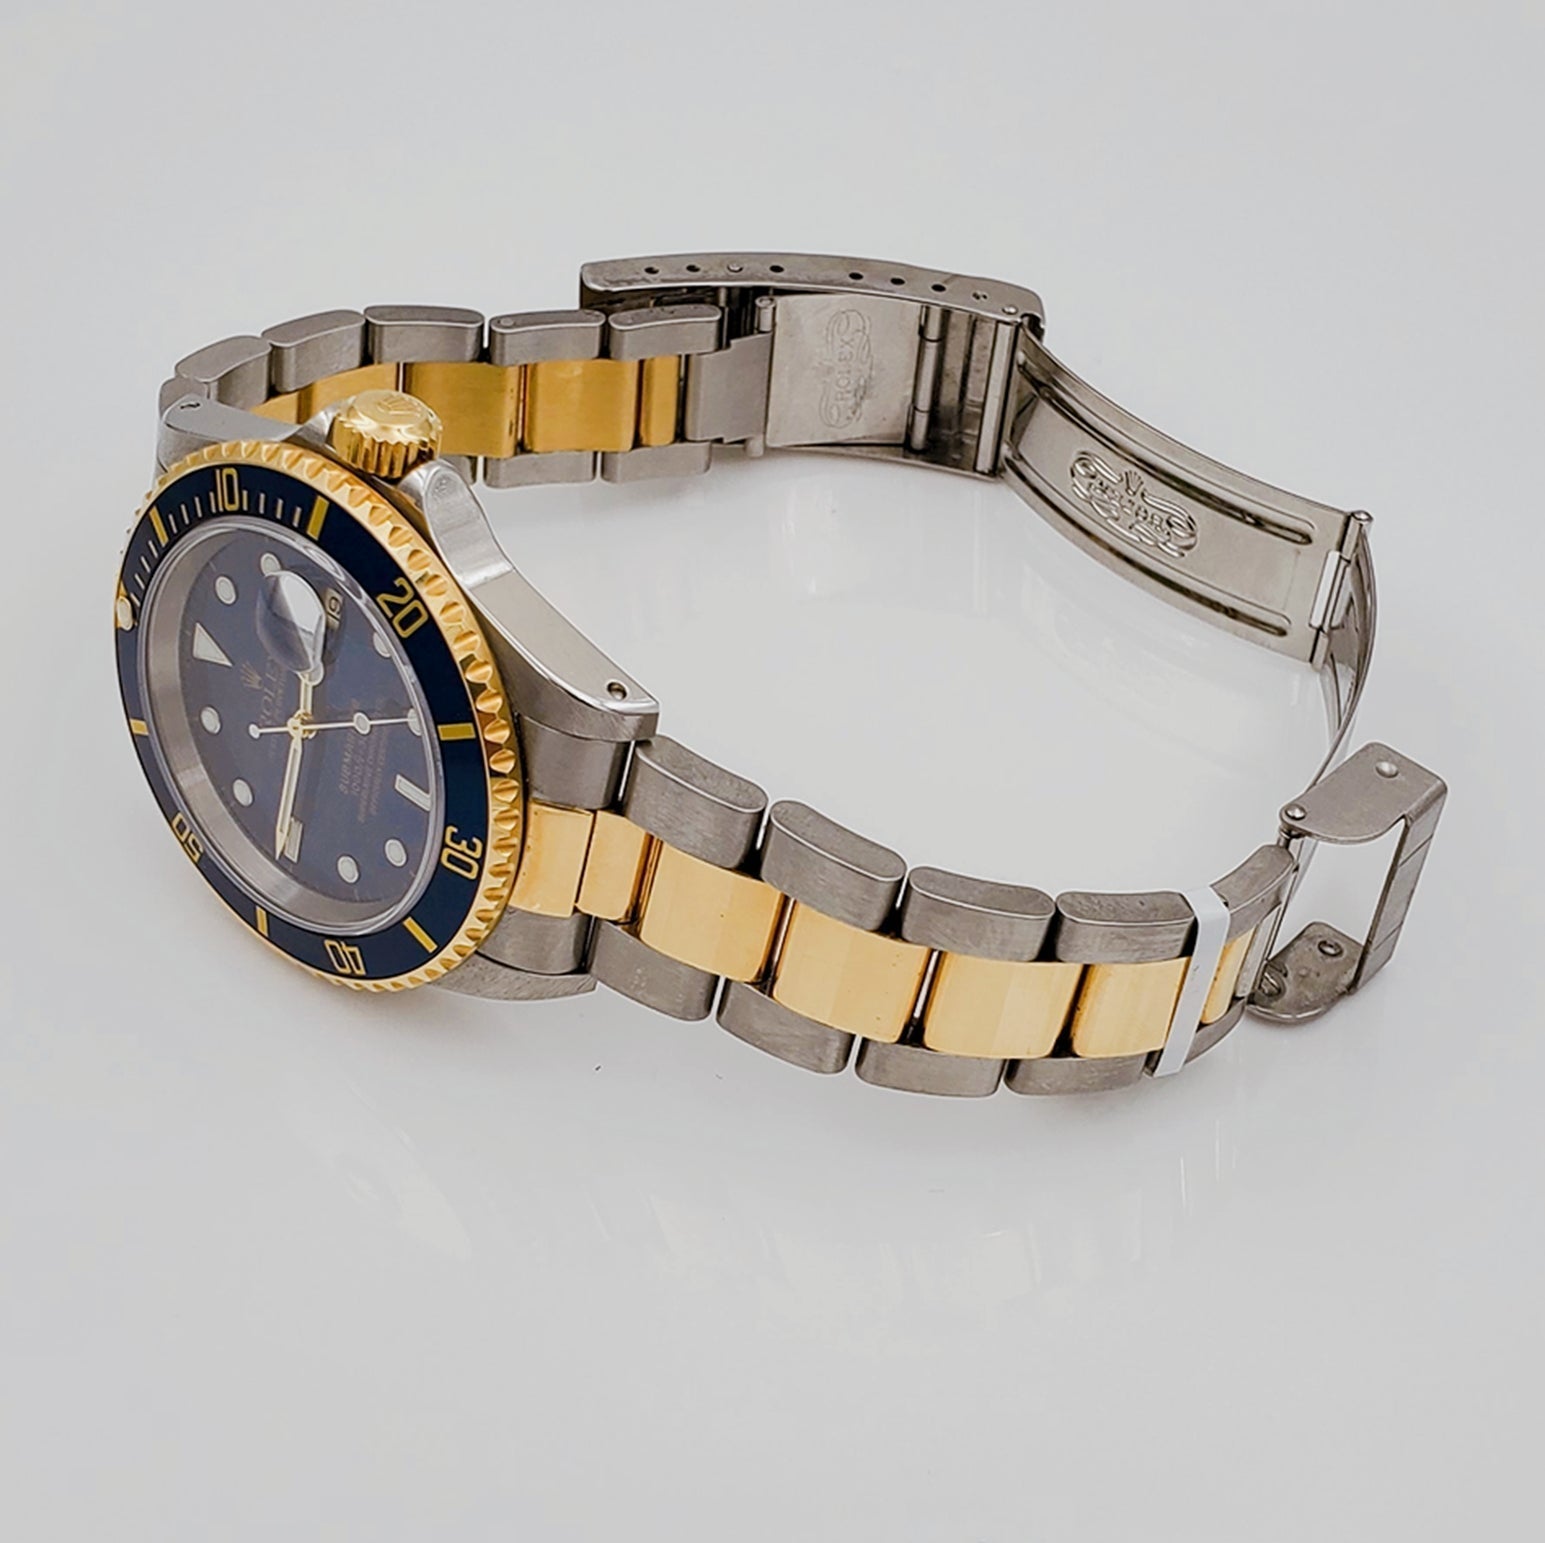 2007 Men's Rolex 40mm Submariner Oyster Perpetual Two Tone 18K Yellow Gold / Stainless Steel Watch with Blue Dial and Blue Bezel. (Pre-Owned 16613LB)